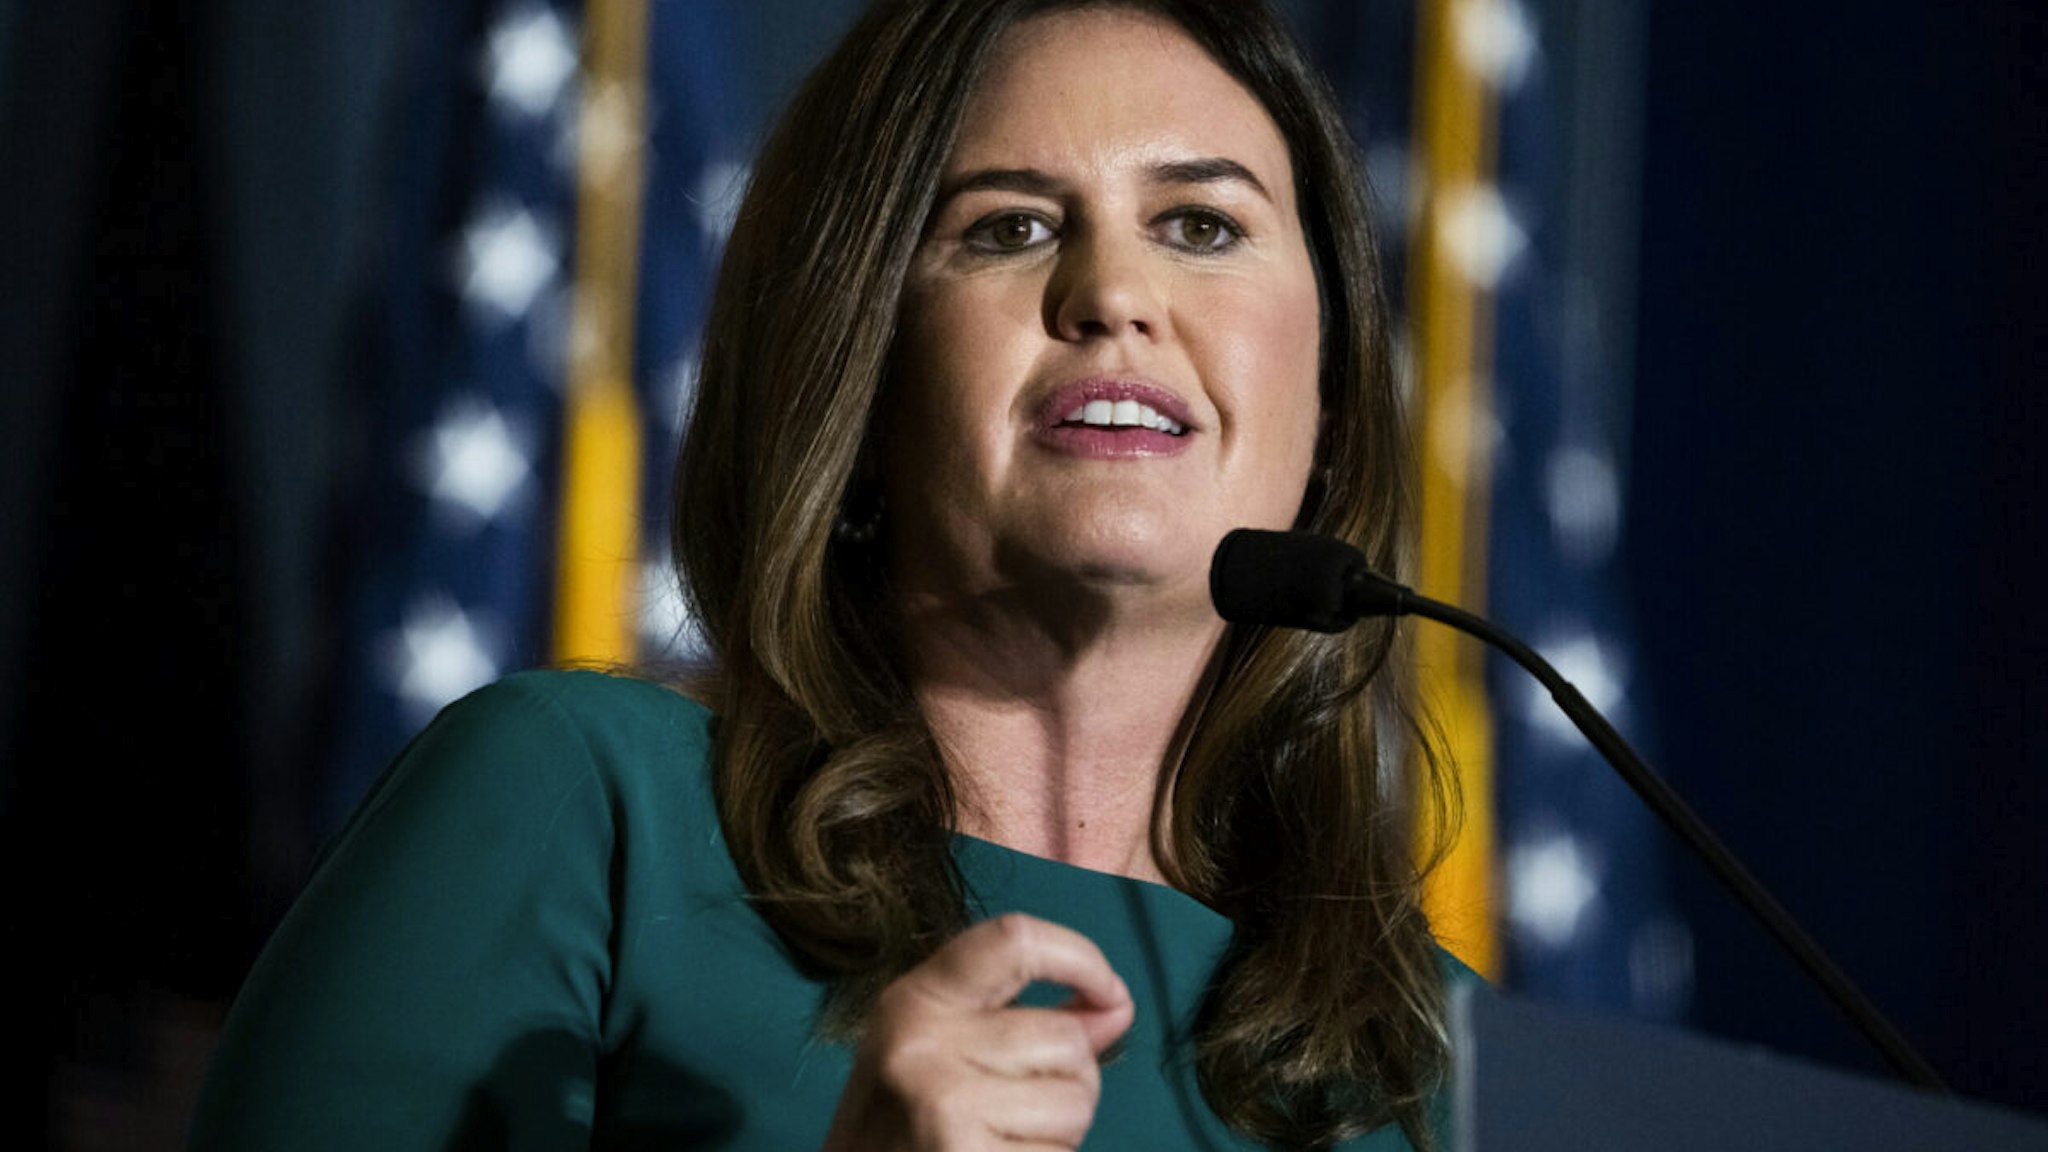 ARKANSAS REPUBLICAN GOVERNOR VICTORY PRE-WRITE Republican Sarah Huckabee Sanders has followed in her father’s footsteps by becoming governor of Arkansas. Sanders, 40, who was former President Trump’s press secretary, defeated Democrat nominee Chris Jones to earn the role in which her father, Mike Huckabee, served from 1996-2007. In addition to Trump’s endorsement, Sanders had the backing of outgoing Governor Asa Hutchinson and held a commanding lead throughout the race. The centerpiece of Sanders’ platform was her “plan for a safer, stronger Arkansas,” which outlined her strategy to lower violent crime. In her proposal, she promised to “never defund the police,” increase prison capacity, and vowed to “push back on the dangerous rhetoric of the radical left.” Jones opposed Sanders’ anti-crime platform and pushed his own “PB&J” plan, which stood for pre-school, broadband, and jobs. Sanders also campaigned on a plan to further prioritize education in Arkansas. The proposal, called LEARNS (Literacy, Empowerment, Accountability, Readiness, Networking, and School Safety), aims to increase learning opportunities for kids in the state and “not indoctrinate them with the left’s agenda.” Sanders had all the advantages in a red-state contest, from name recognition and a family tree to policies that resonated with voters. She served as the 31st White House press secretary under Trump from 2017 to 2019 and worked on the election campaigns of her father, who also ran for president. Hutchinson was barred from running again because of term limits.